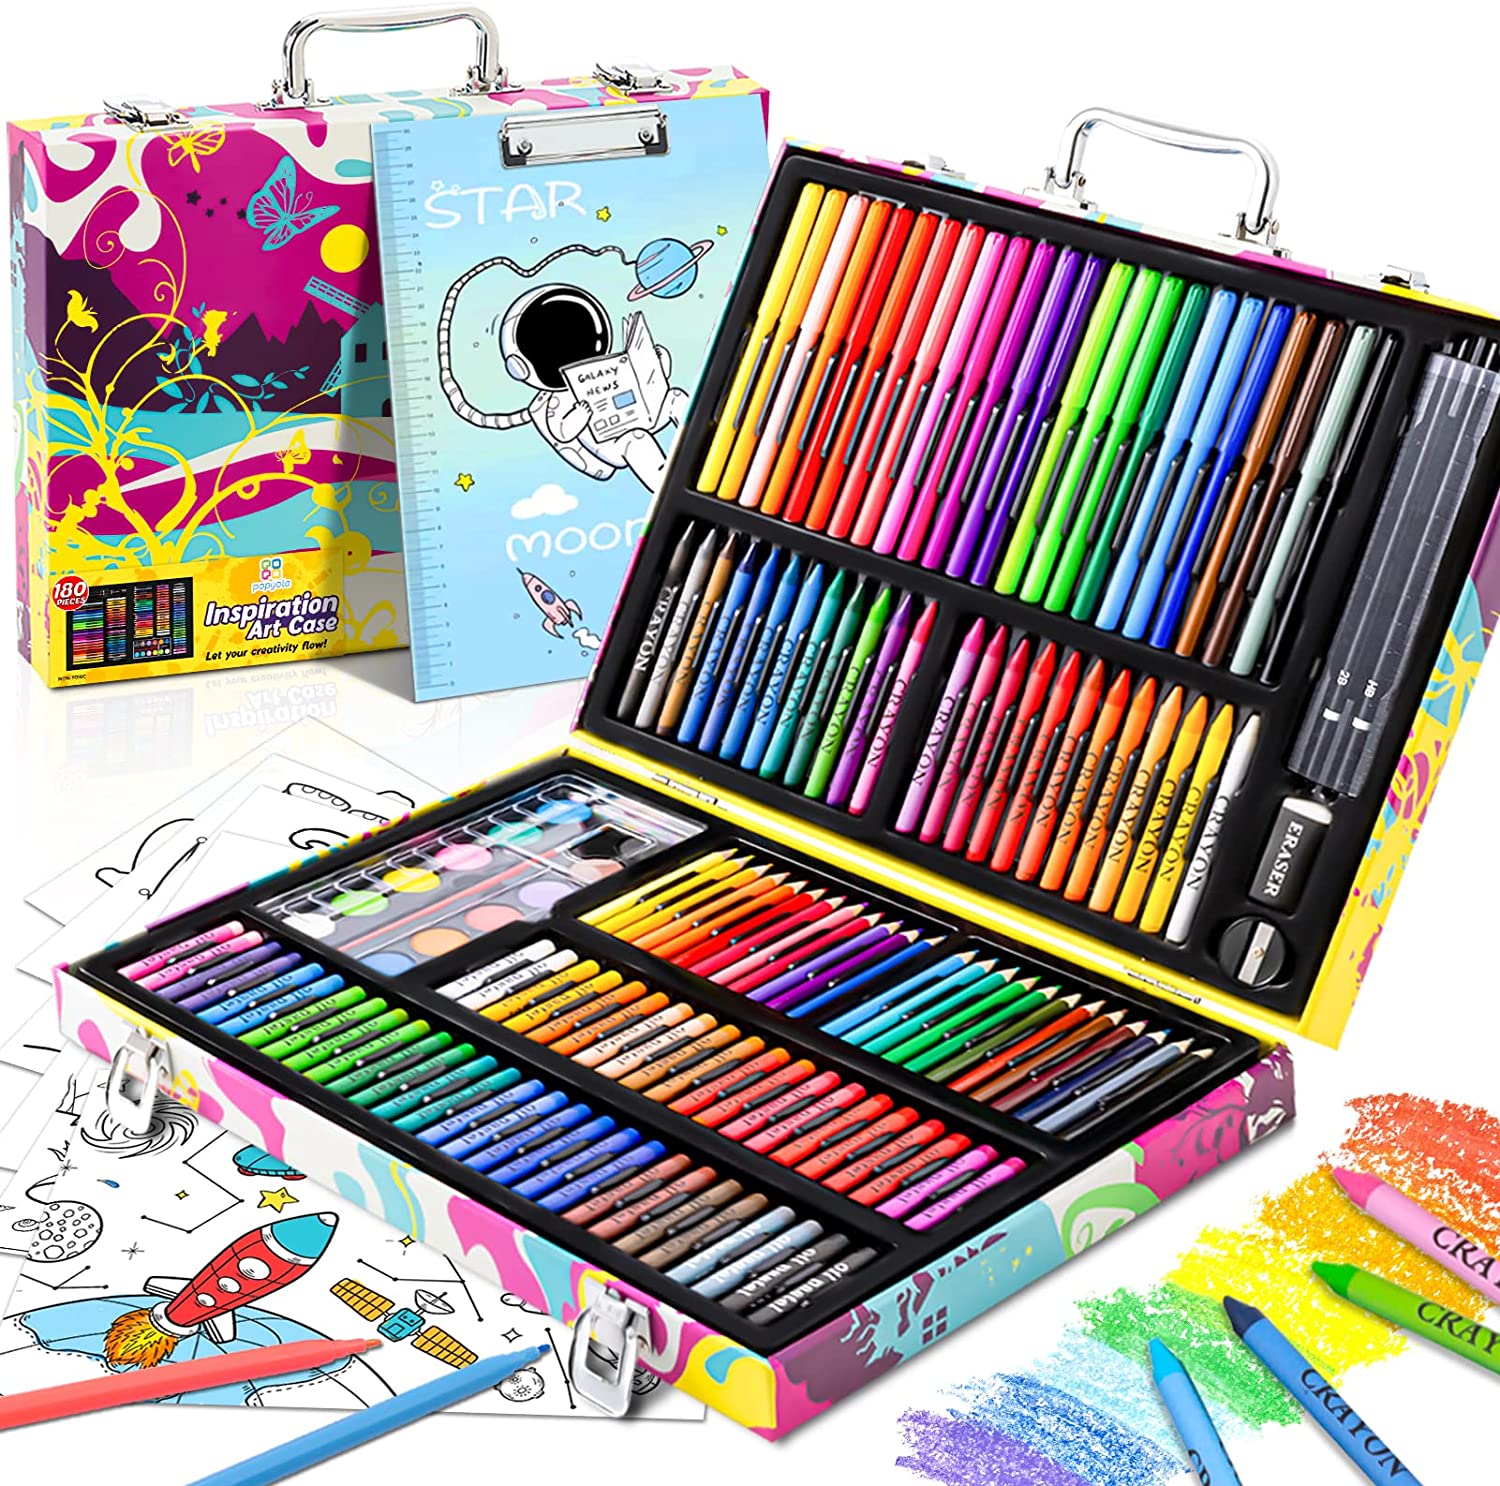  KIDDYCOLOR 158-Pieces Art Set, Deluxe Arts and Crafts